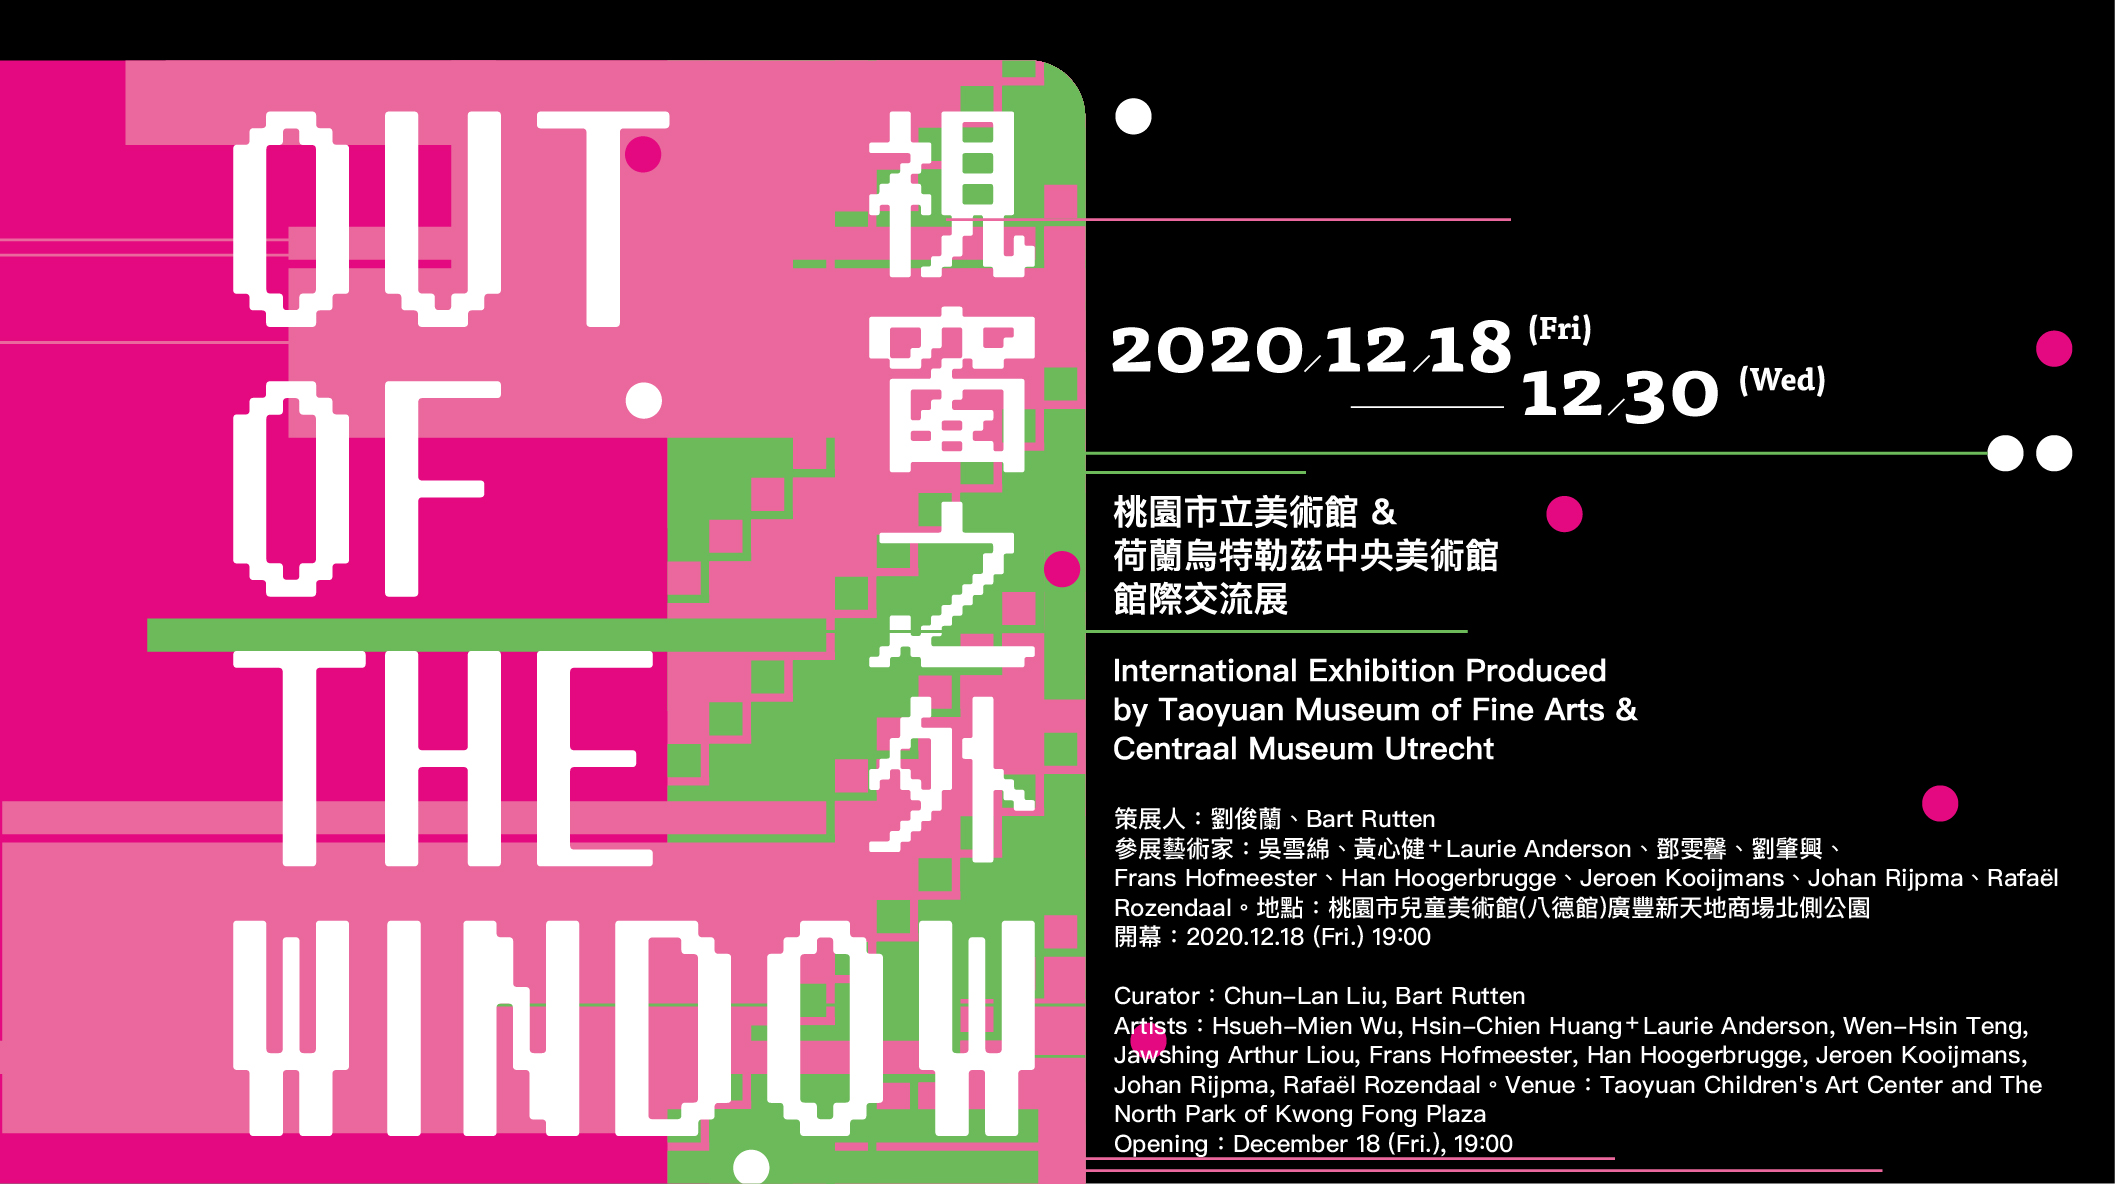 Out of the Window: International Exhibition Produced by Taoyuan Museum of Fine Arts & Centraal Museum Utrecht